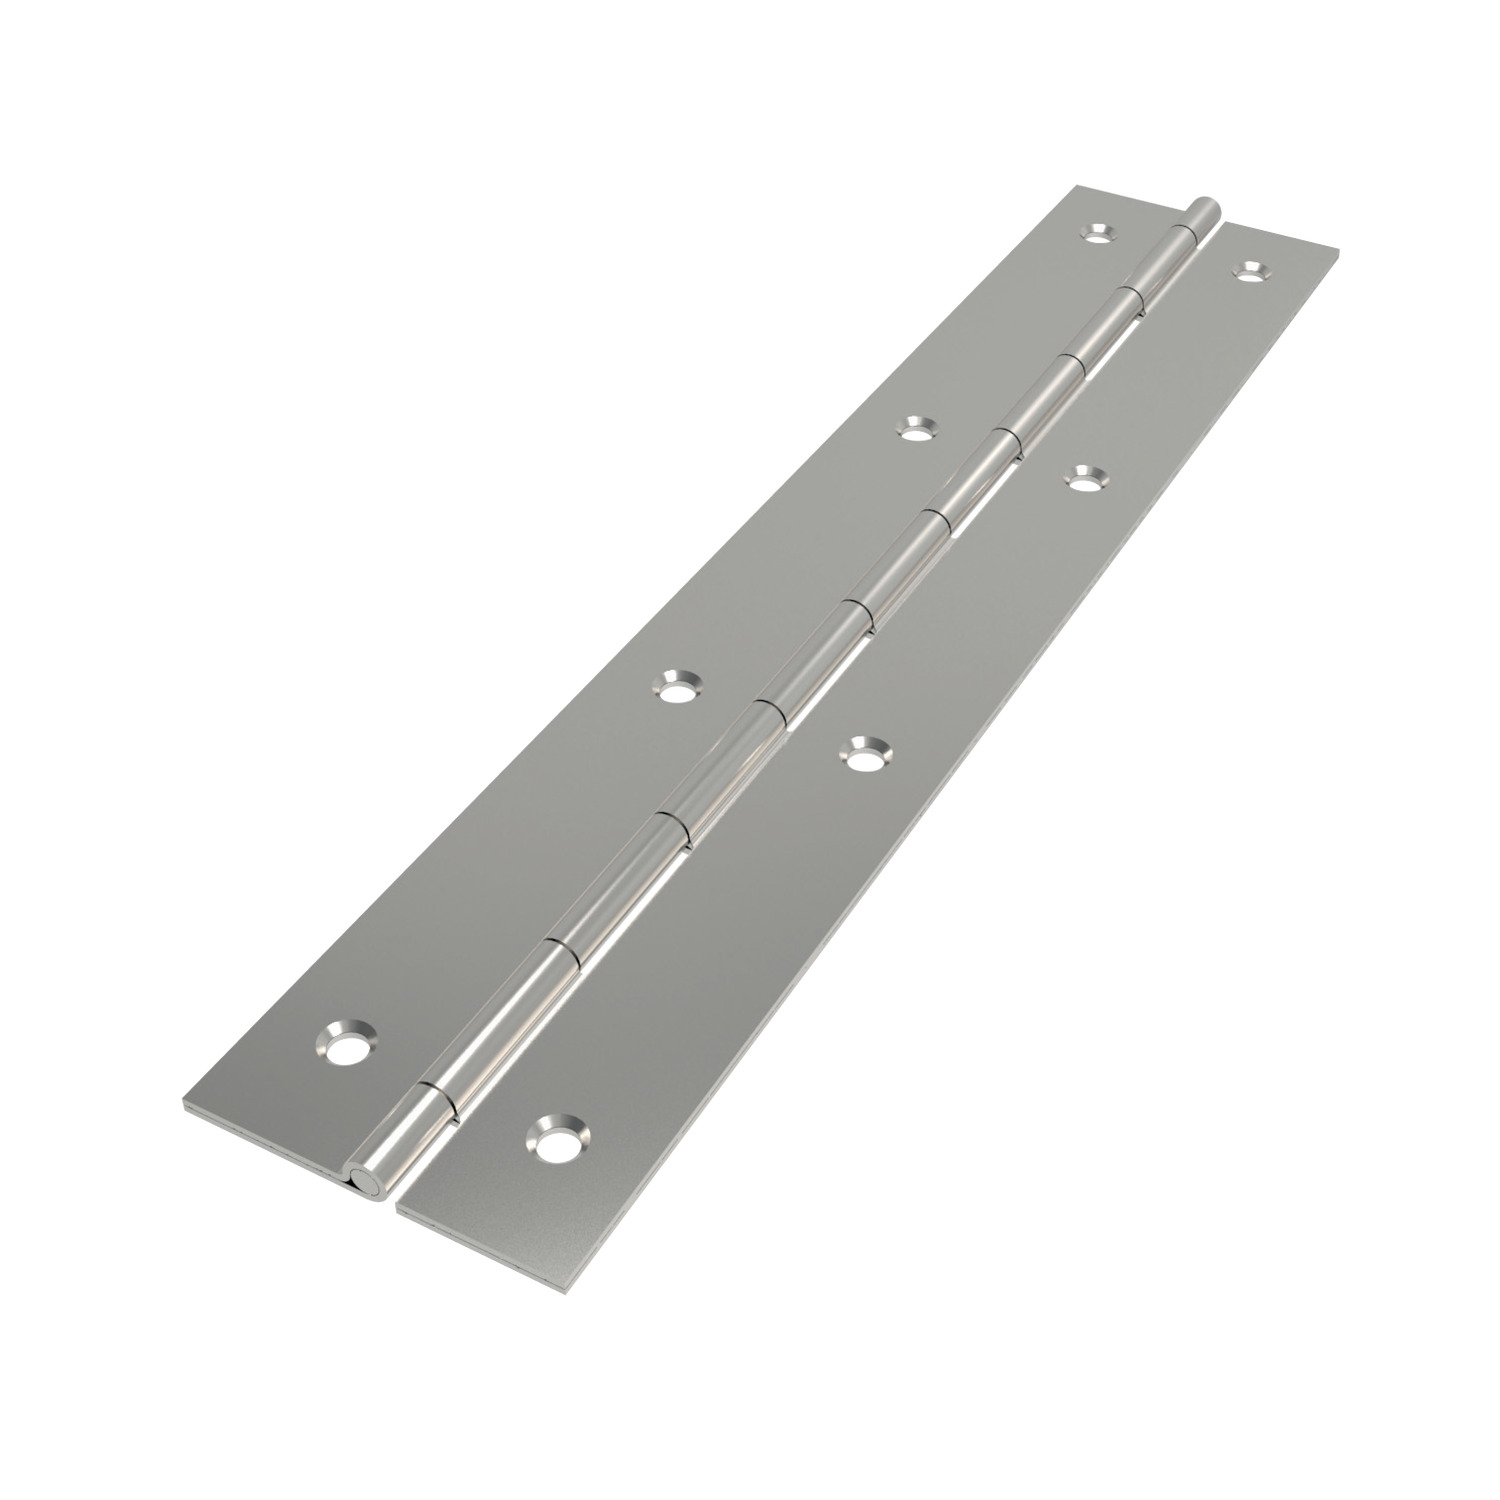 S0100.AC0345 Surface Mount - Piano Hinges Screw mount - Stainless steel. 450 x 30